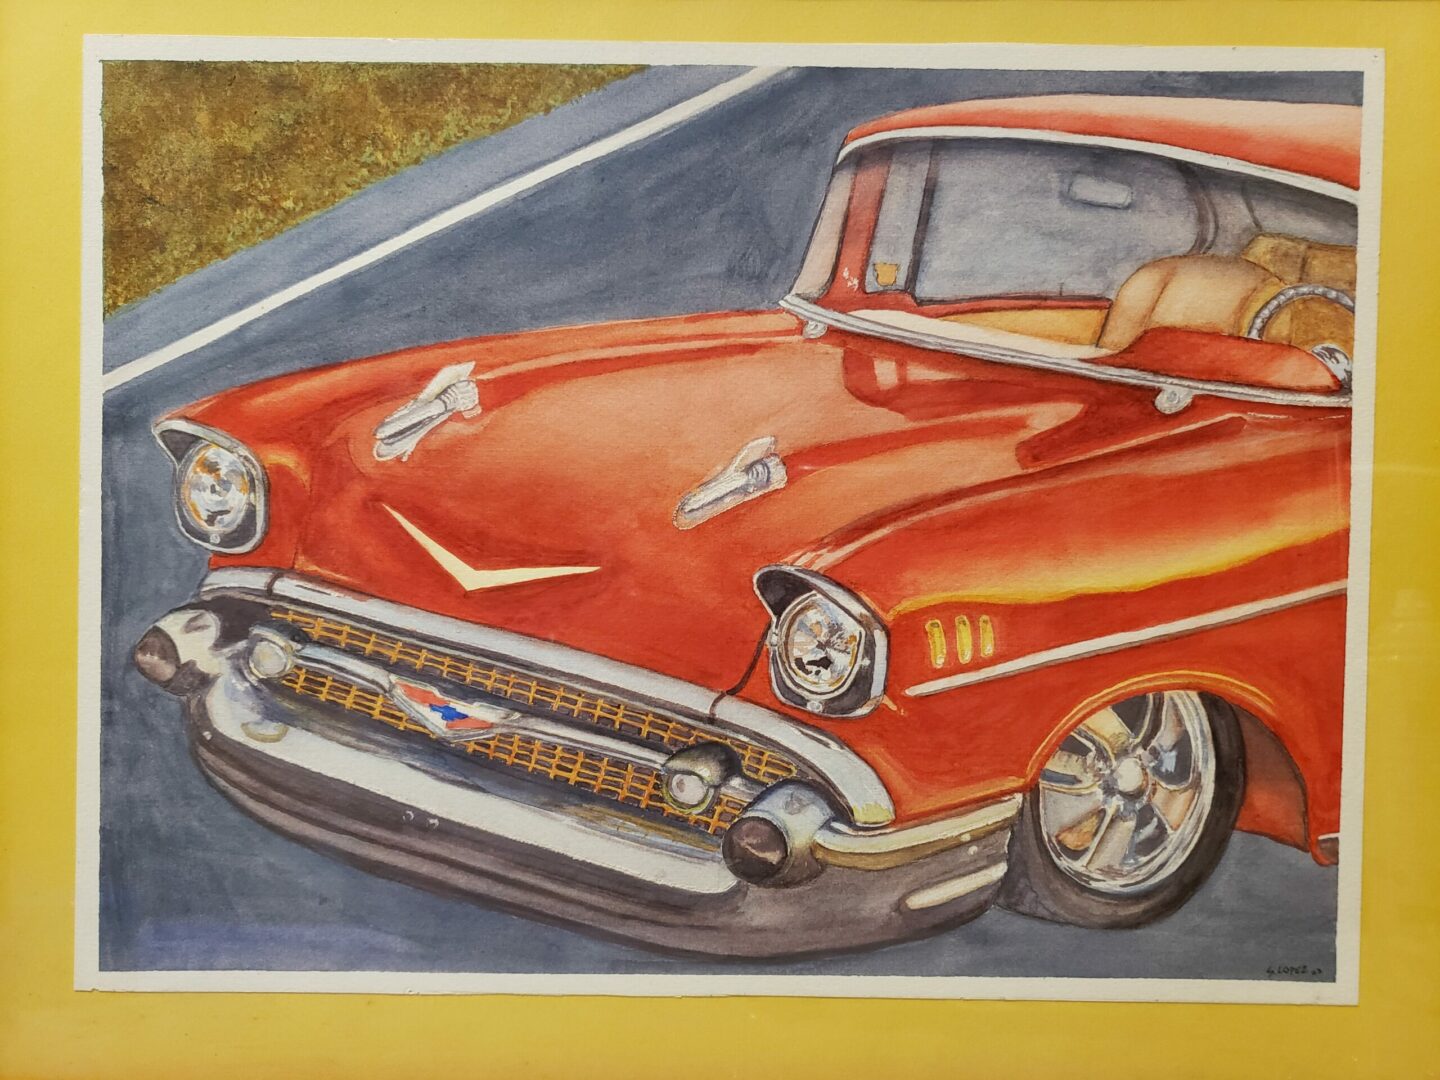 A painting of an old red car on the side of the road.